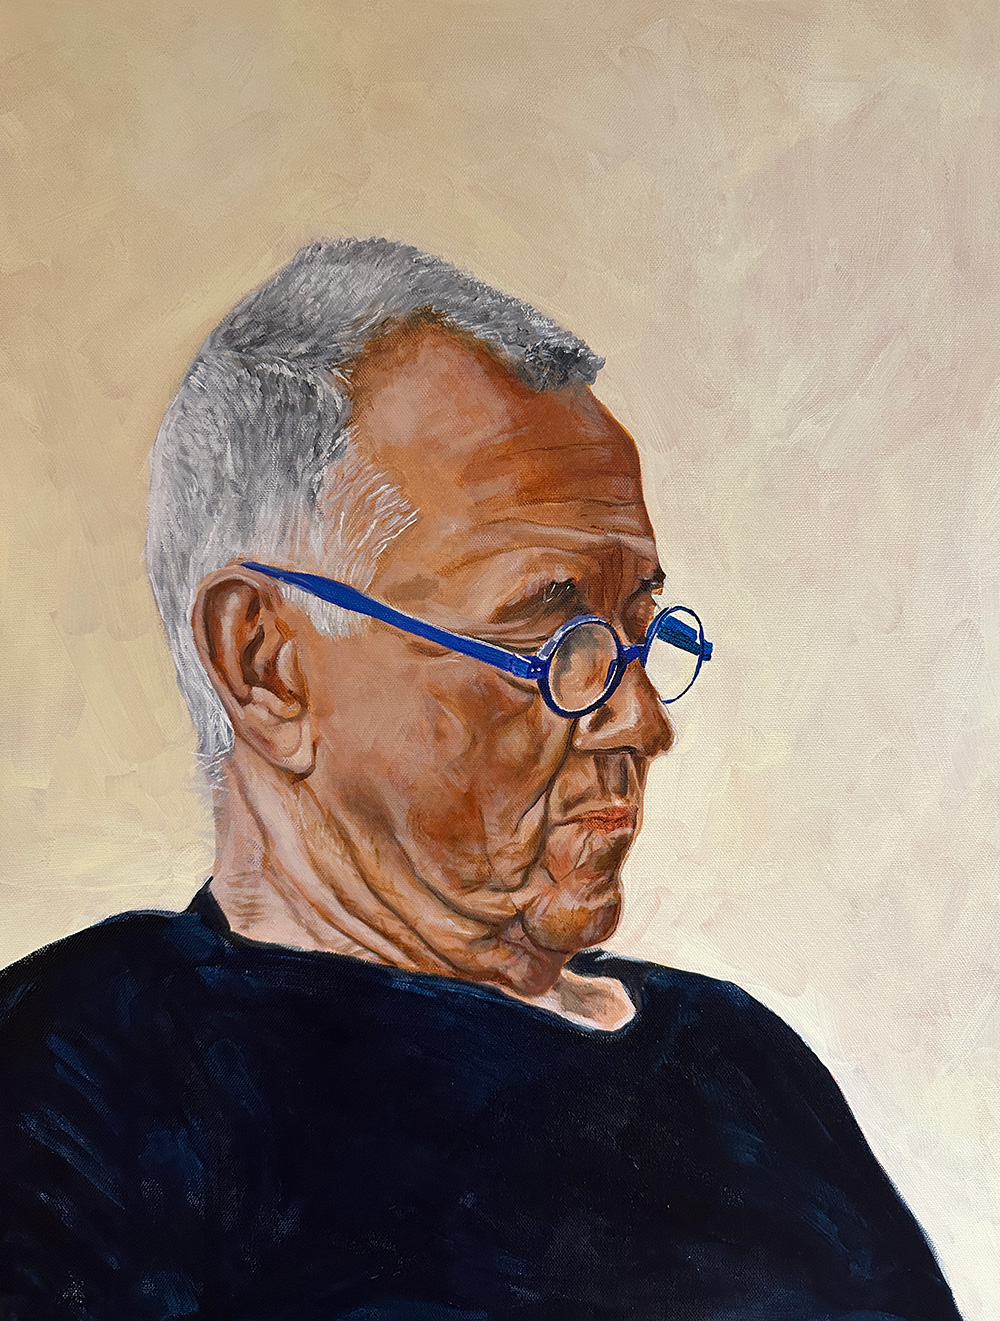 A painting of Tim wearing blue glasses